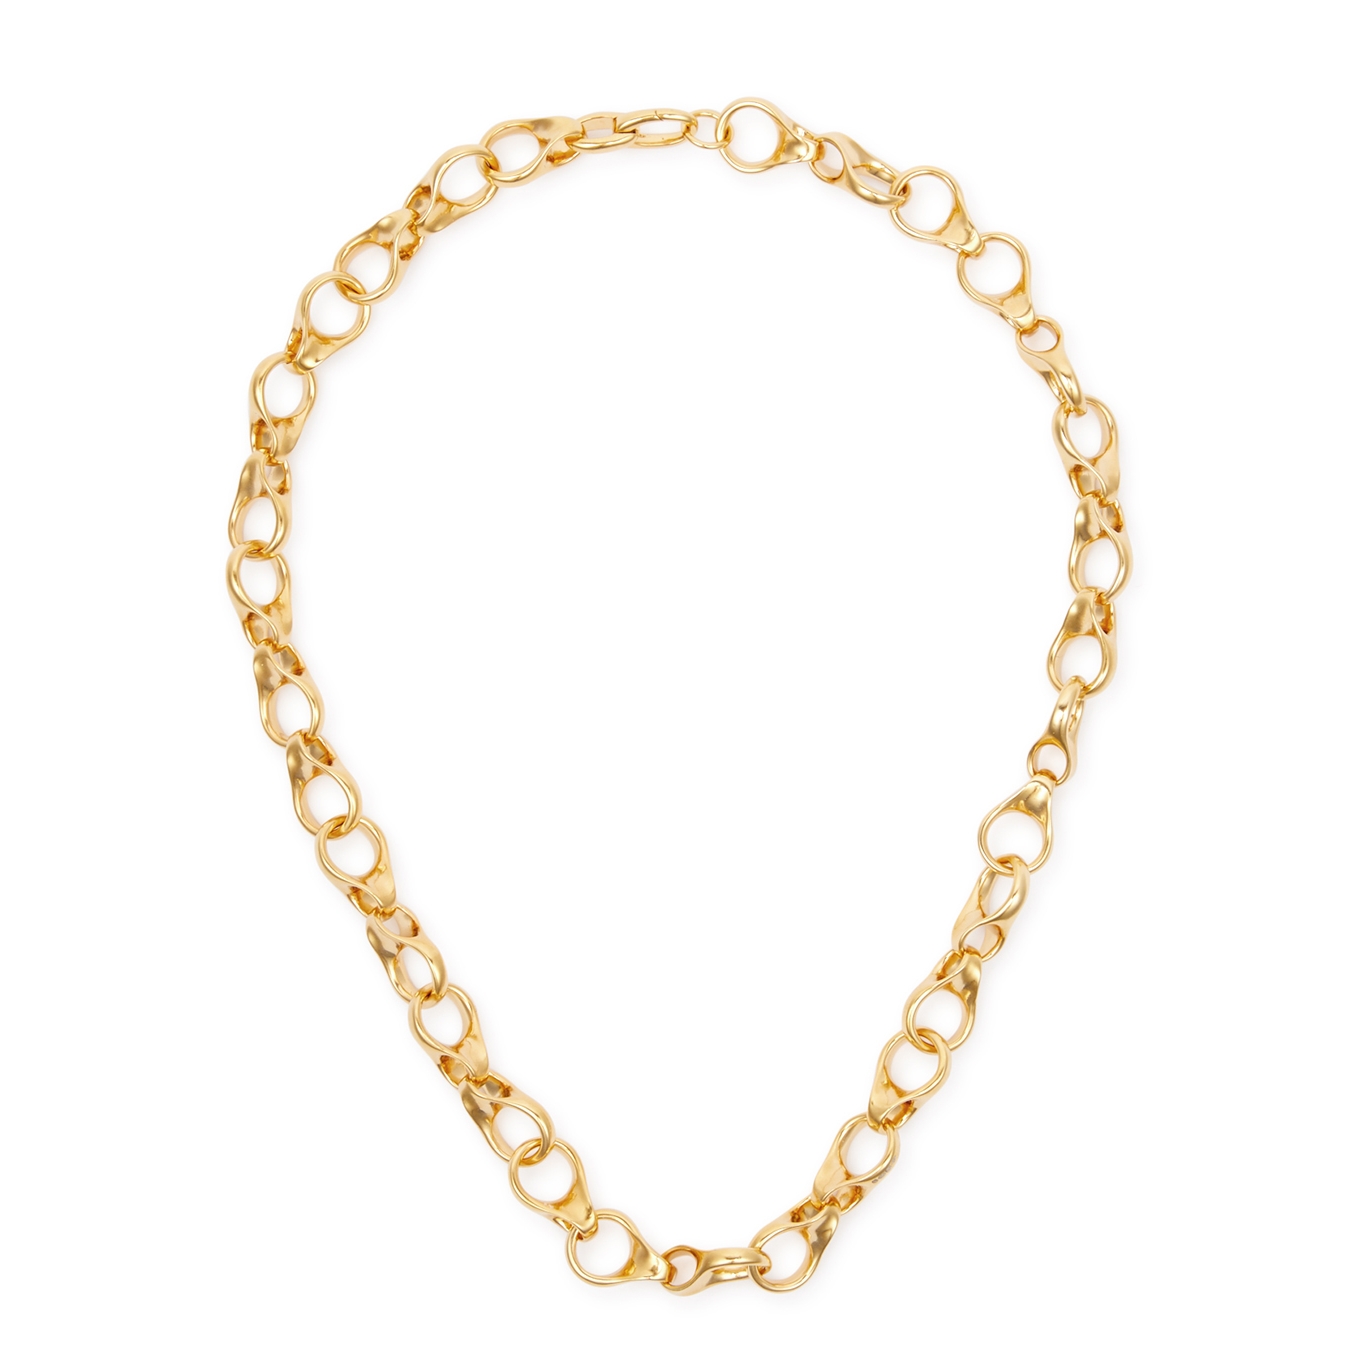 By Pariah The Infinitum 14kt Gold Chain Necklace